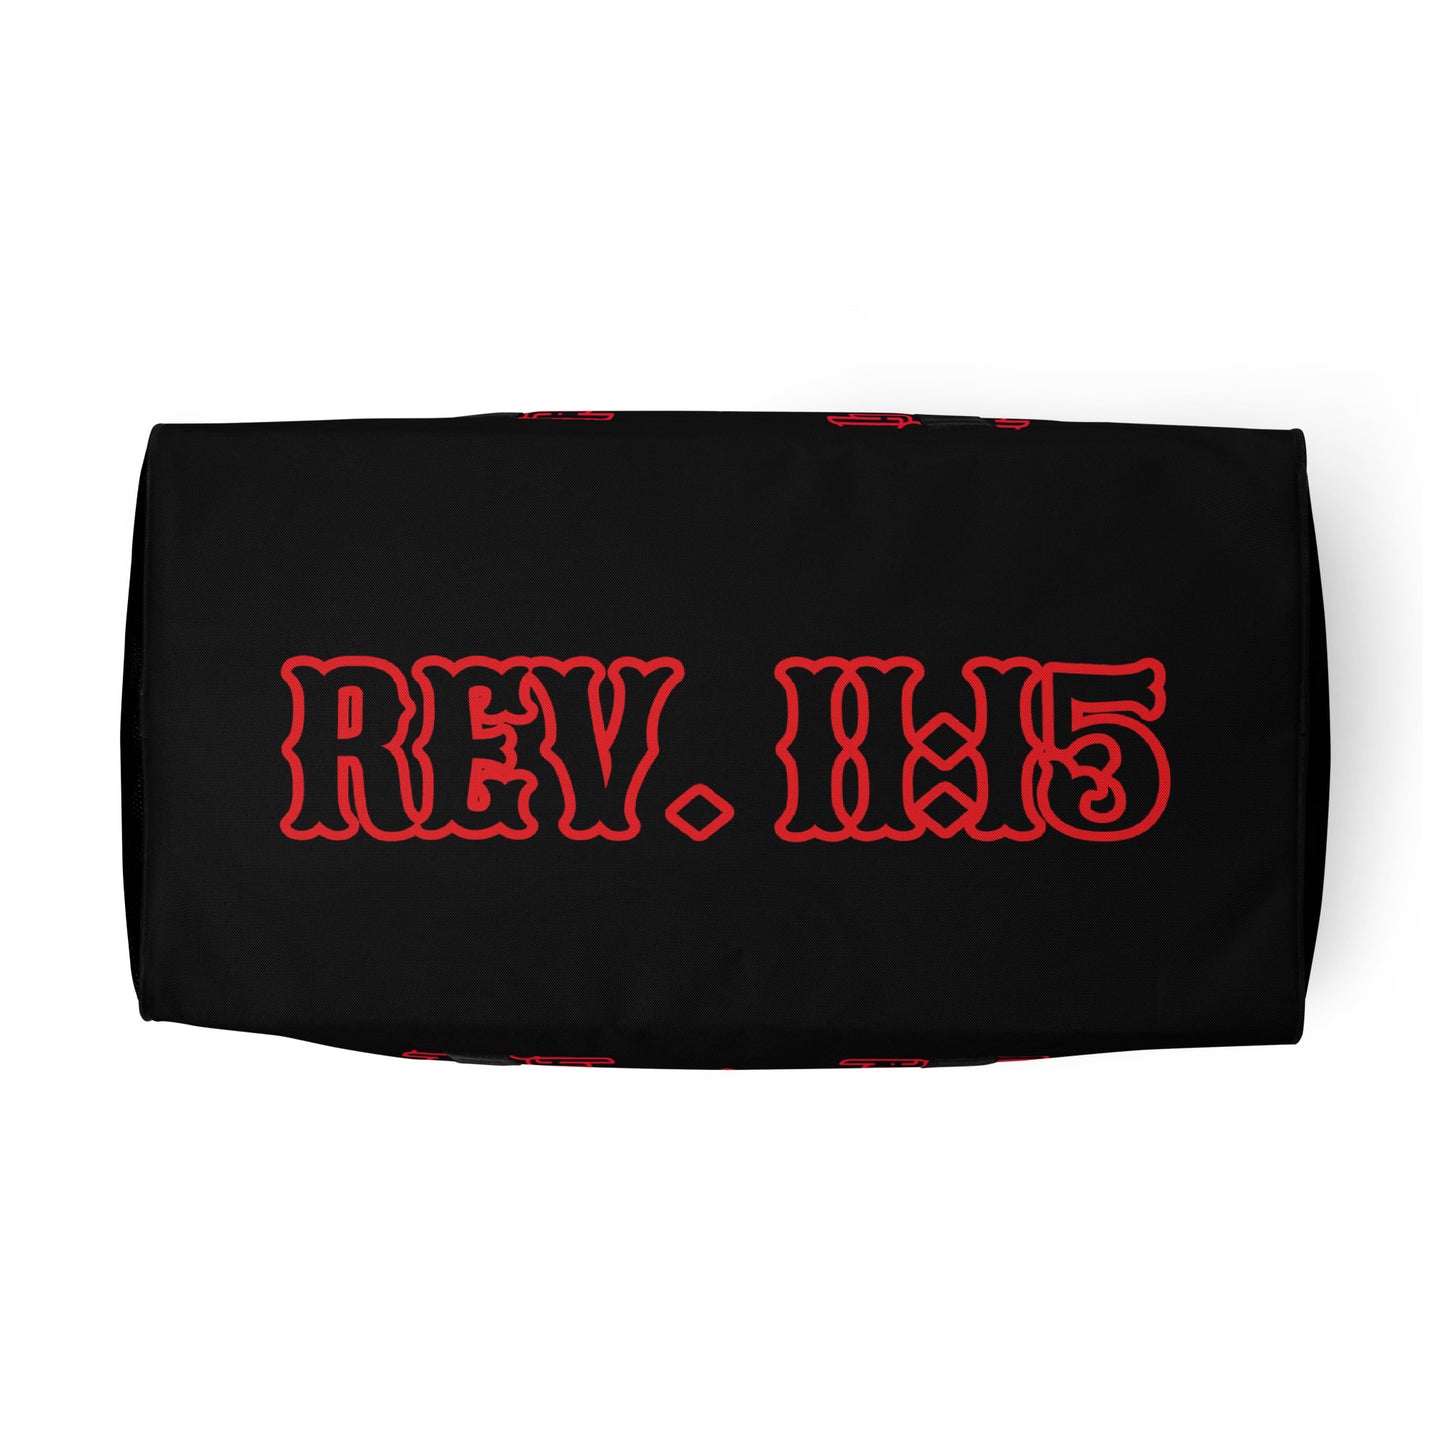 Jesus Reigns Forever- Duffle bag